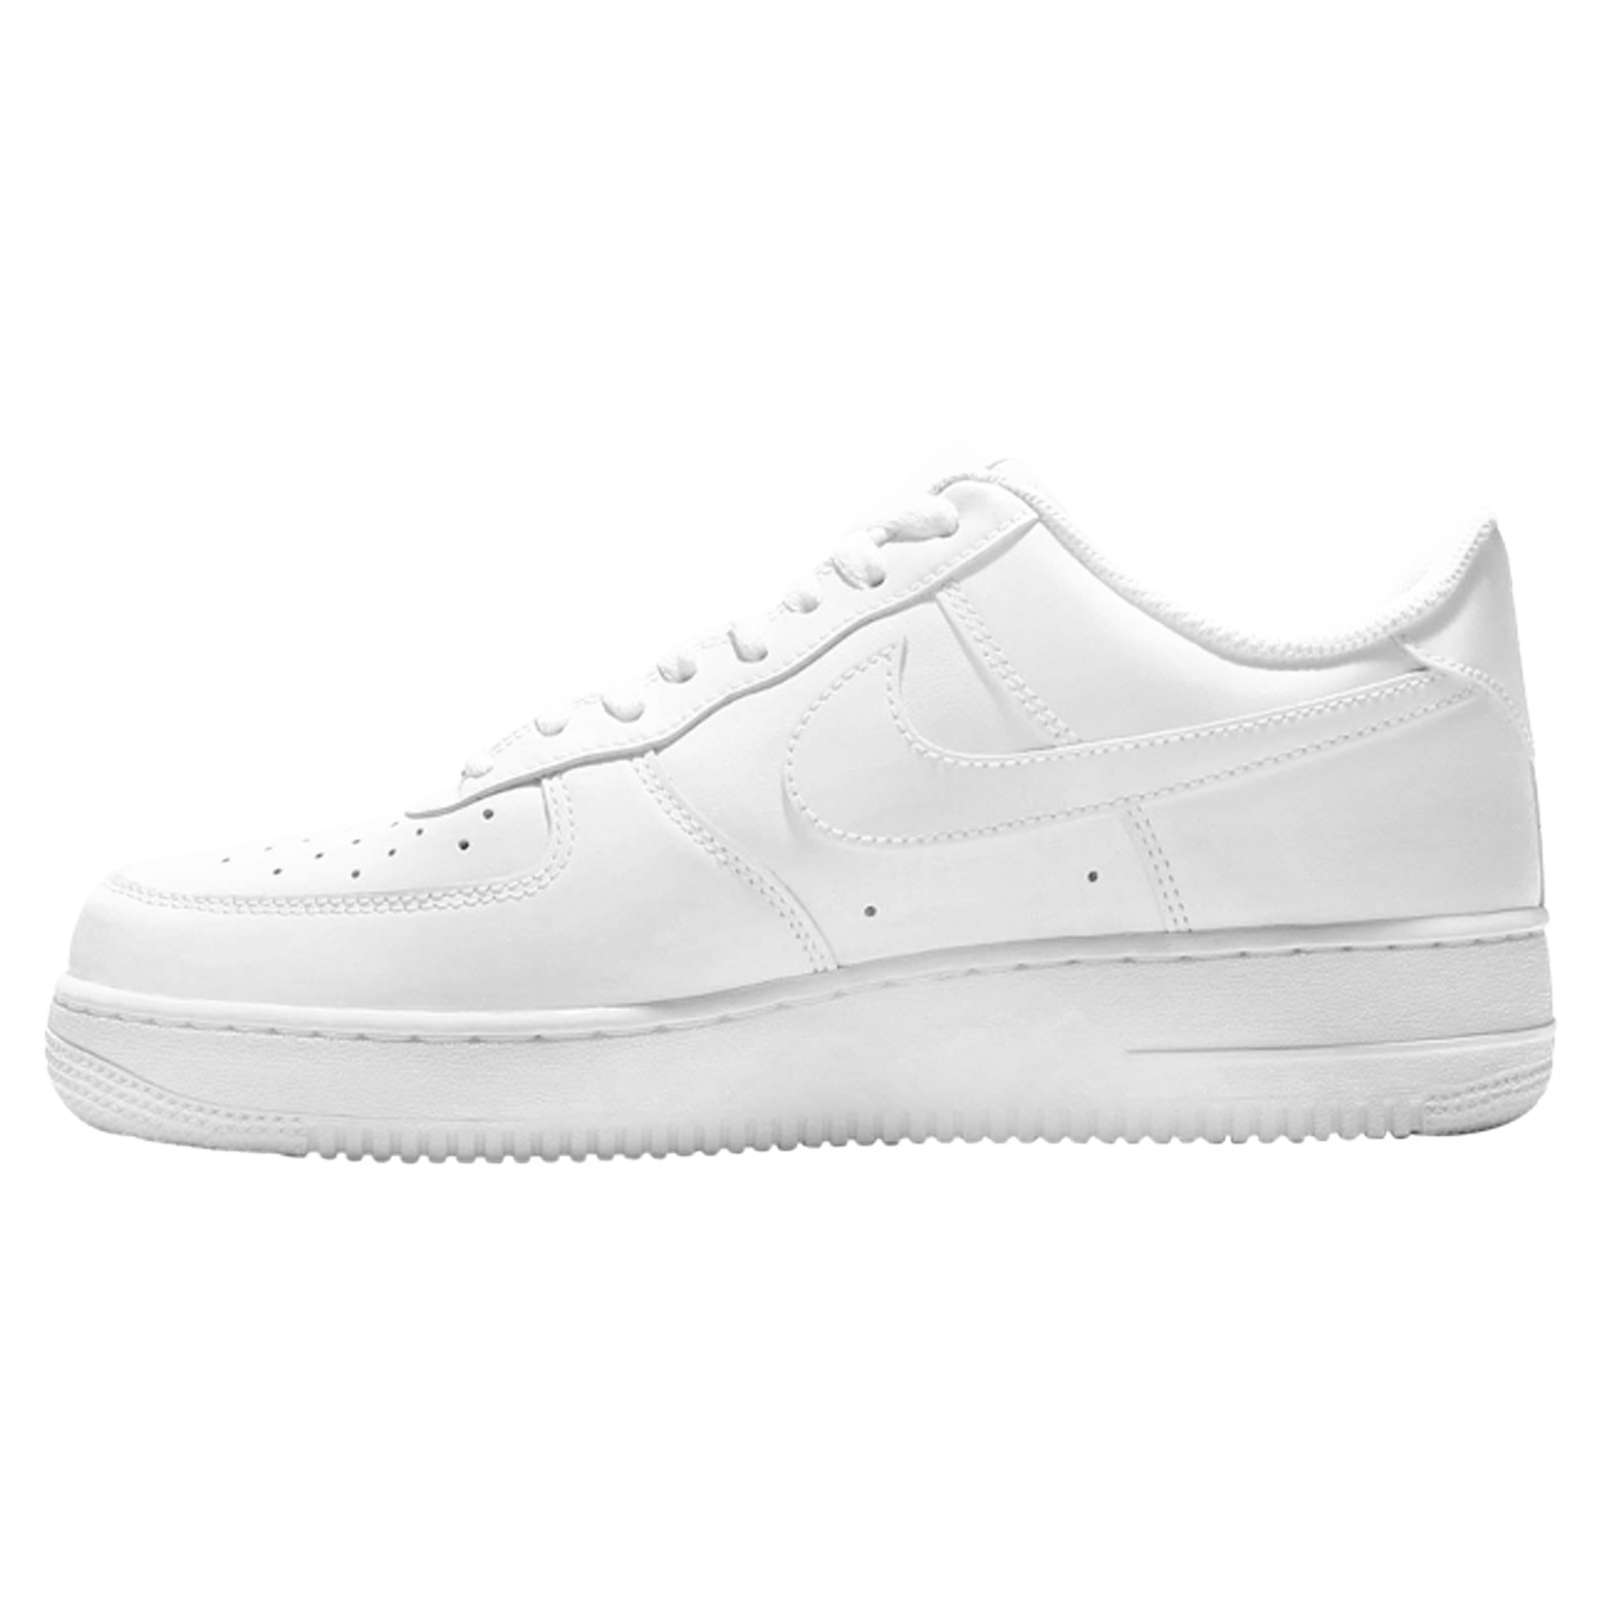 Nike Air Force 1 '07 Full Grain Leather Women's Low-Top Trainers#color_white